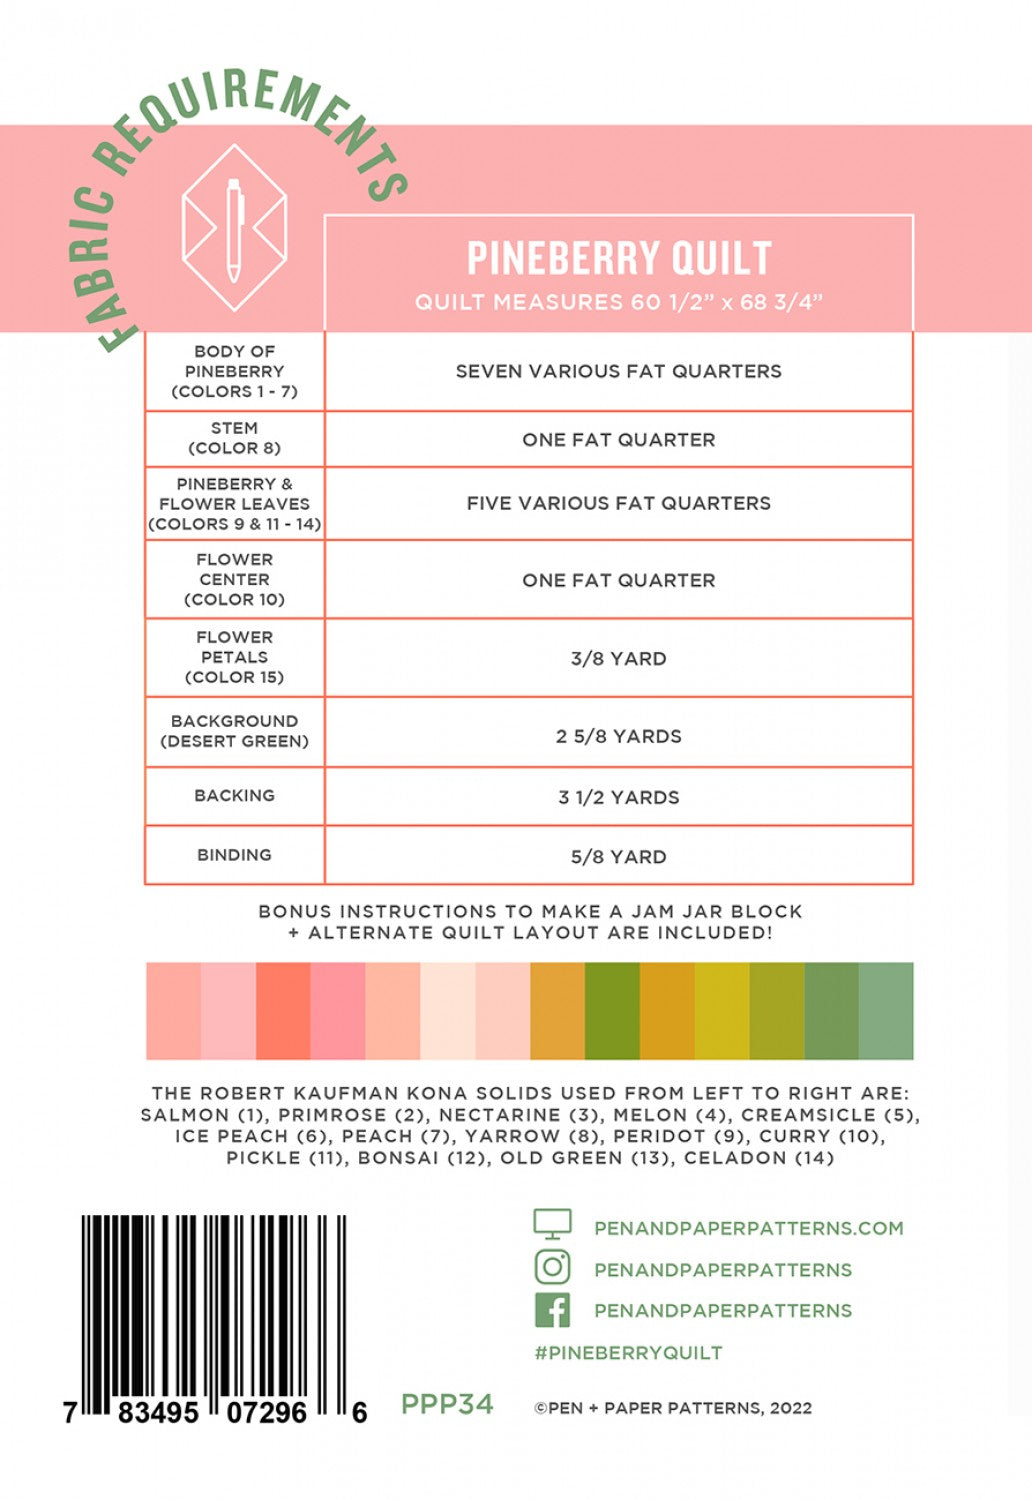 Pineberry Quilt - homesewn